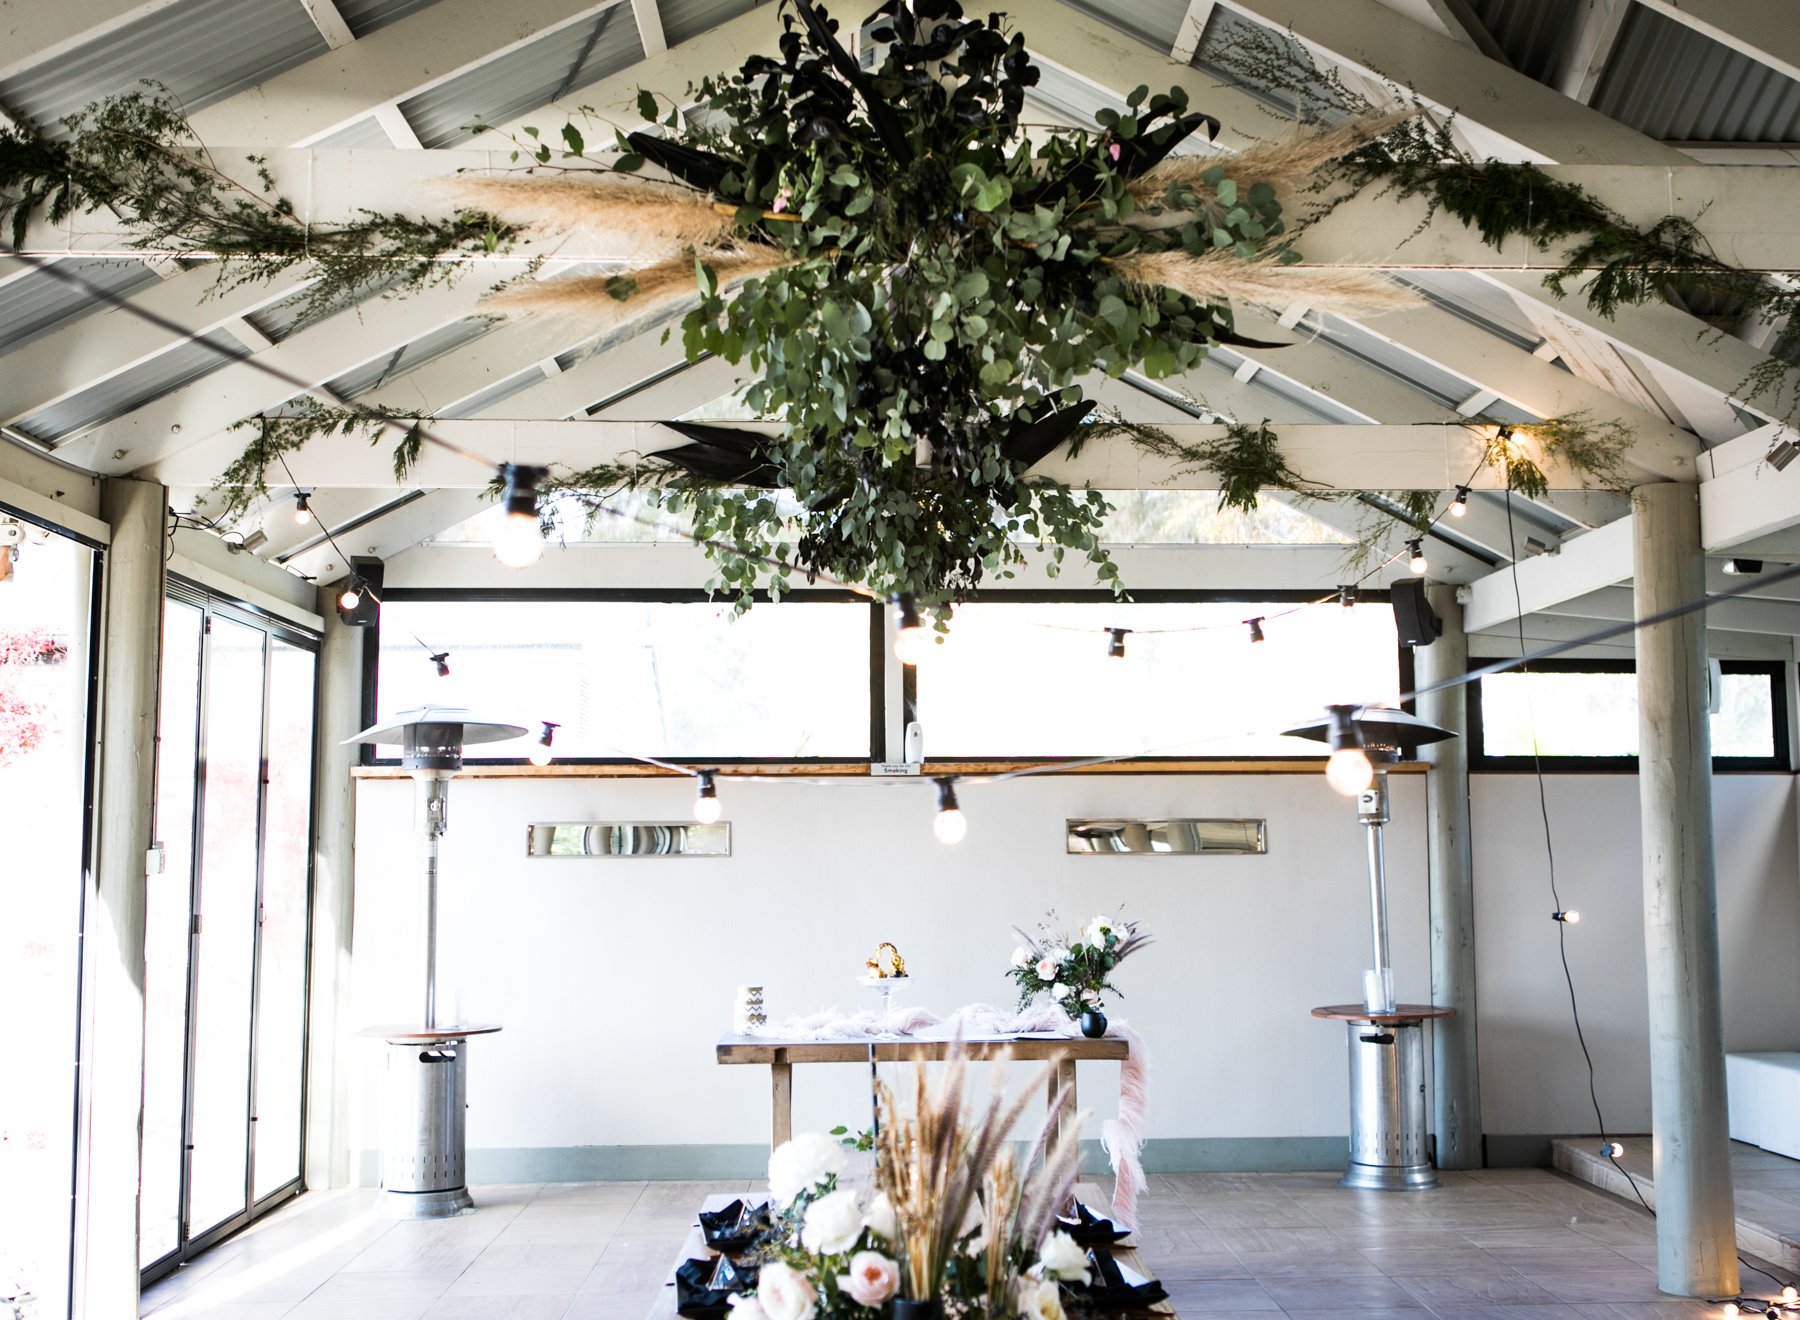 Dramatic ceiling installations for an intimate wedding